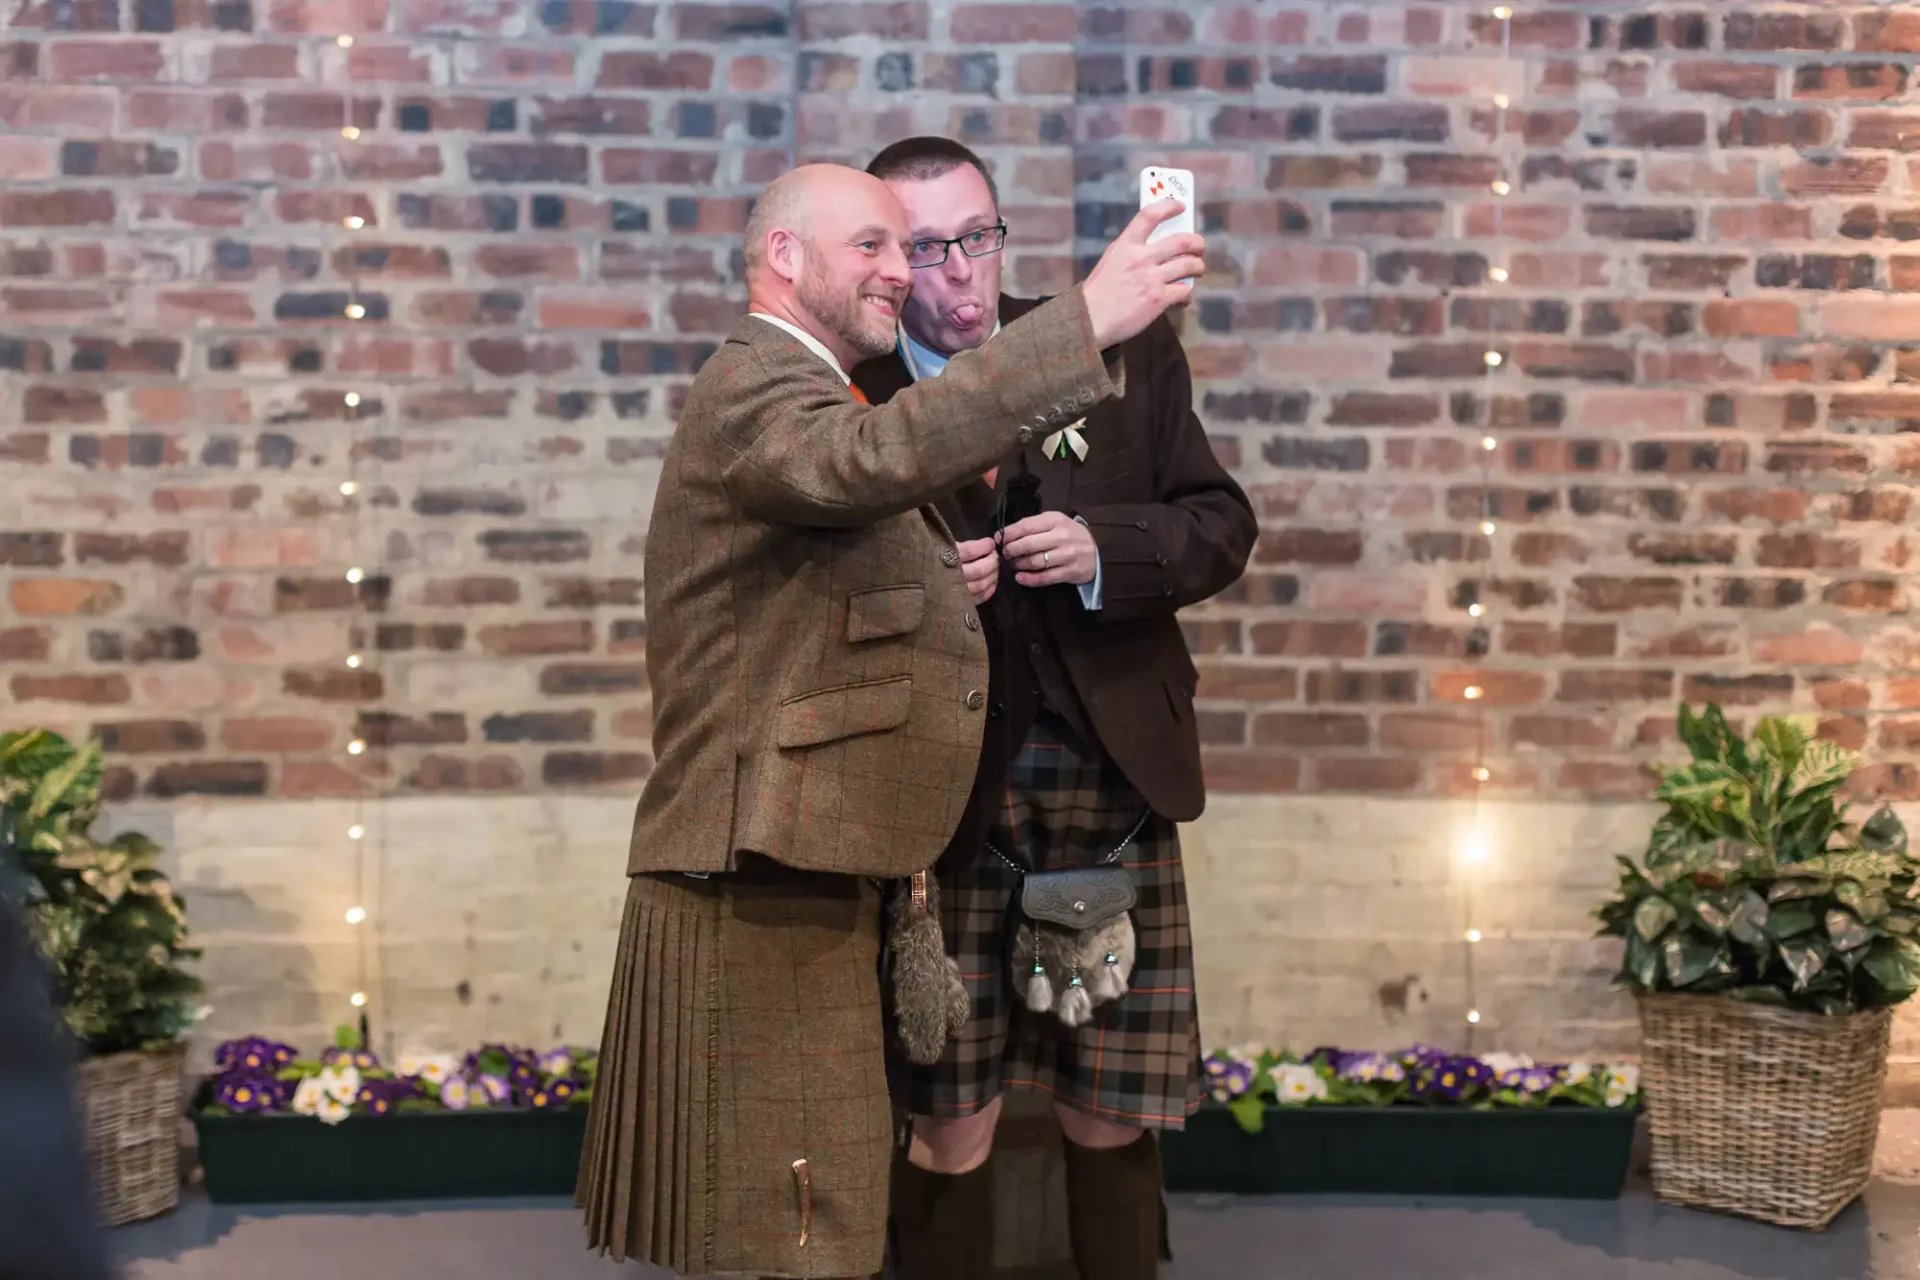 Two men, one in a suit and the other in a kilt, happily taking a selfie together at a venue with brick walls and potted plants.